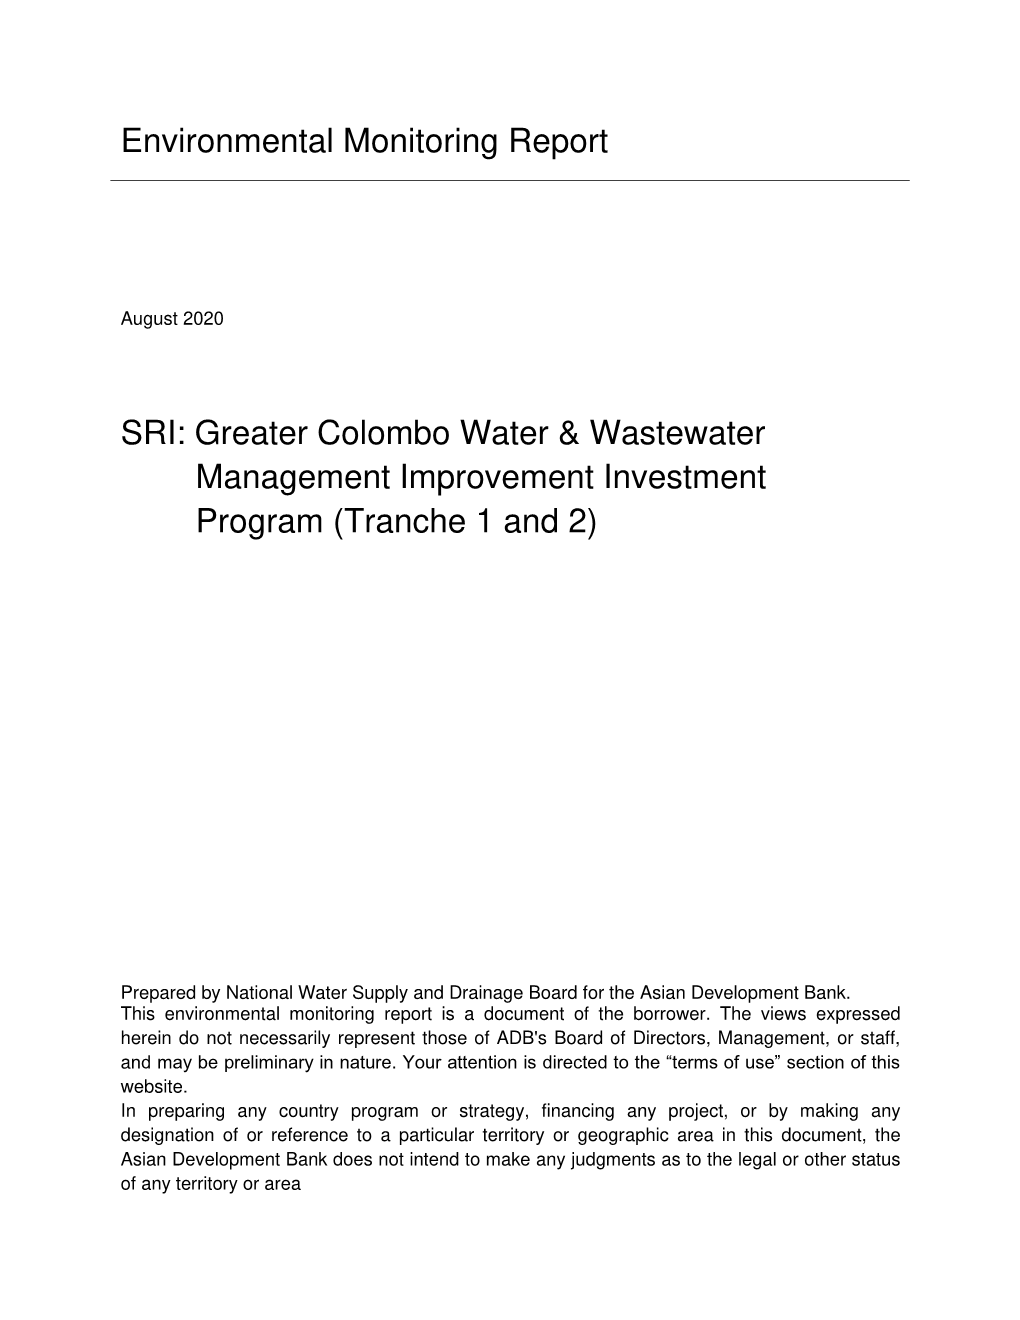 Environmental Monitoring Report SRI: Greater Colombo Water